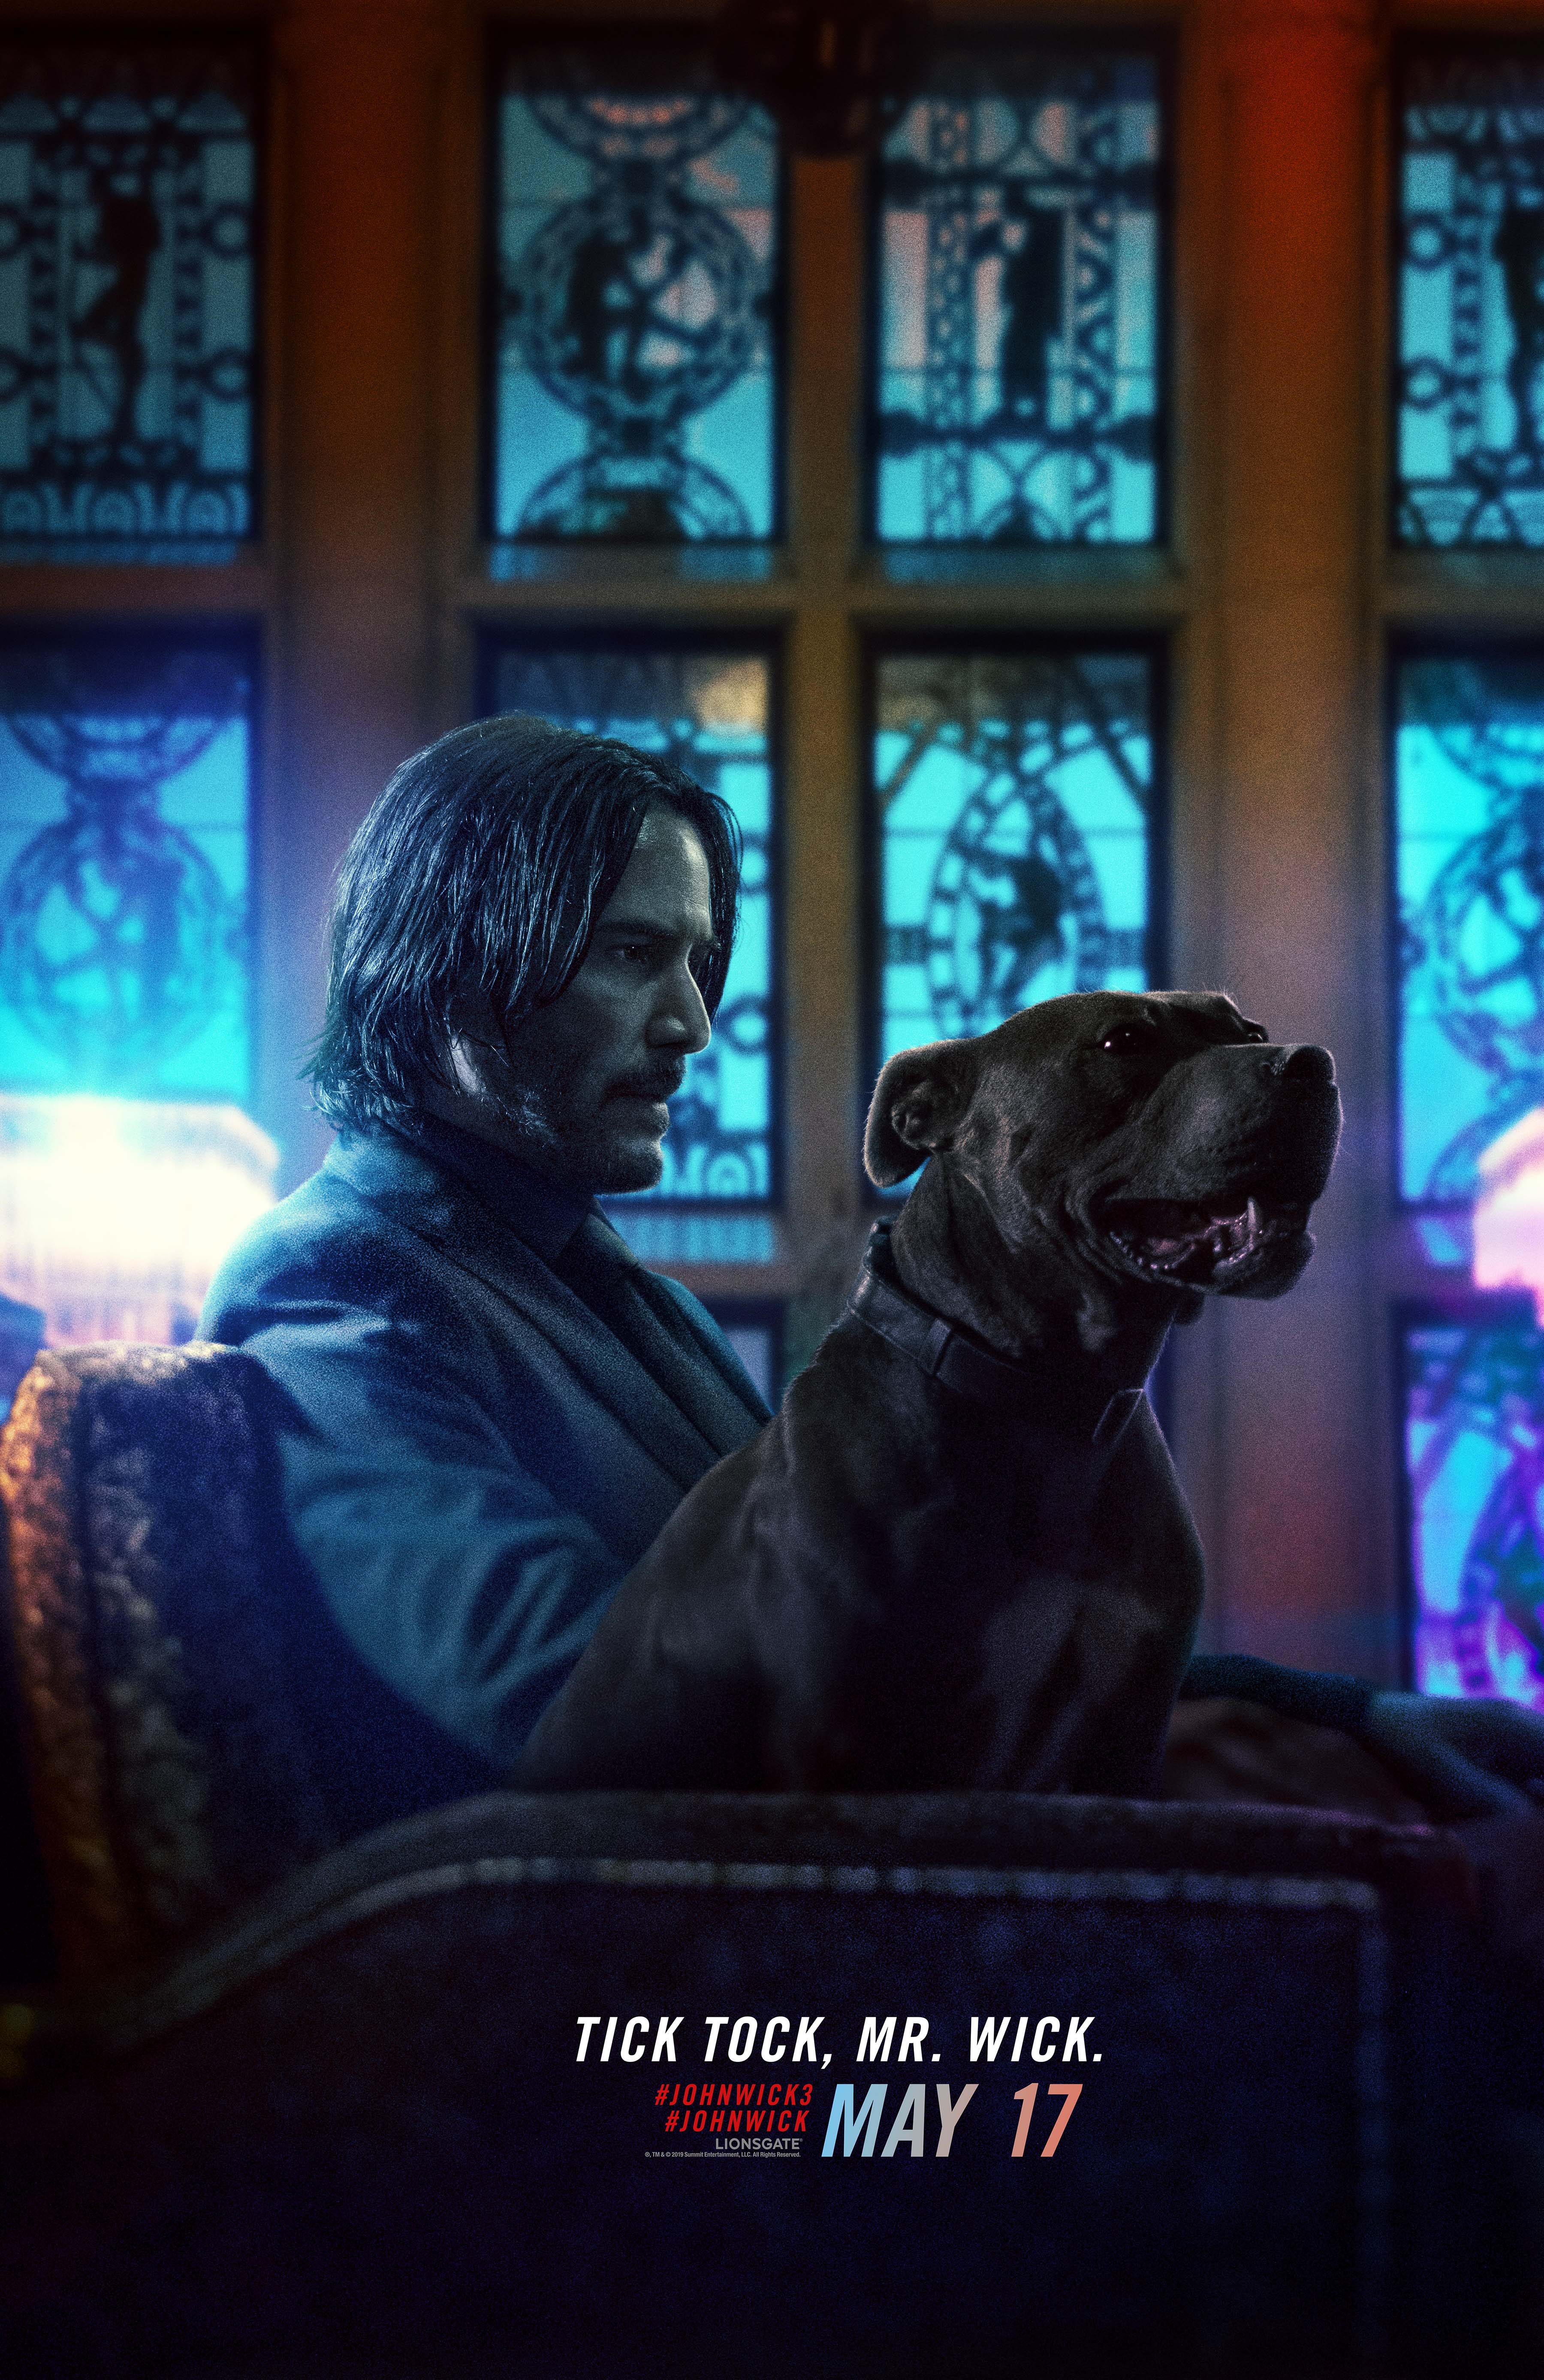 New John Wick 3 Trailer Has Halle Berry's Dogs Going For The Crotch3600 x 5550